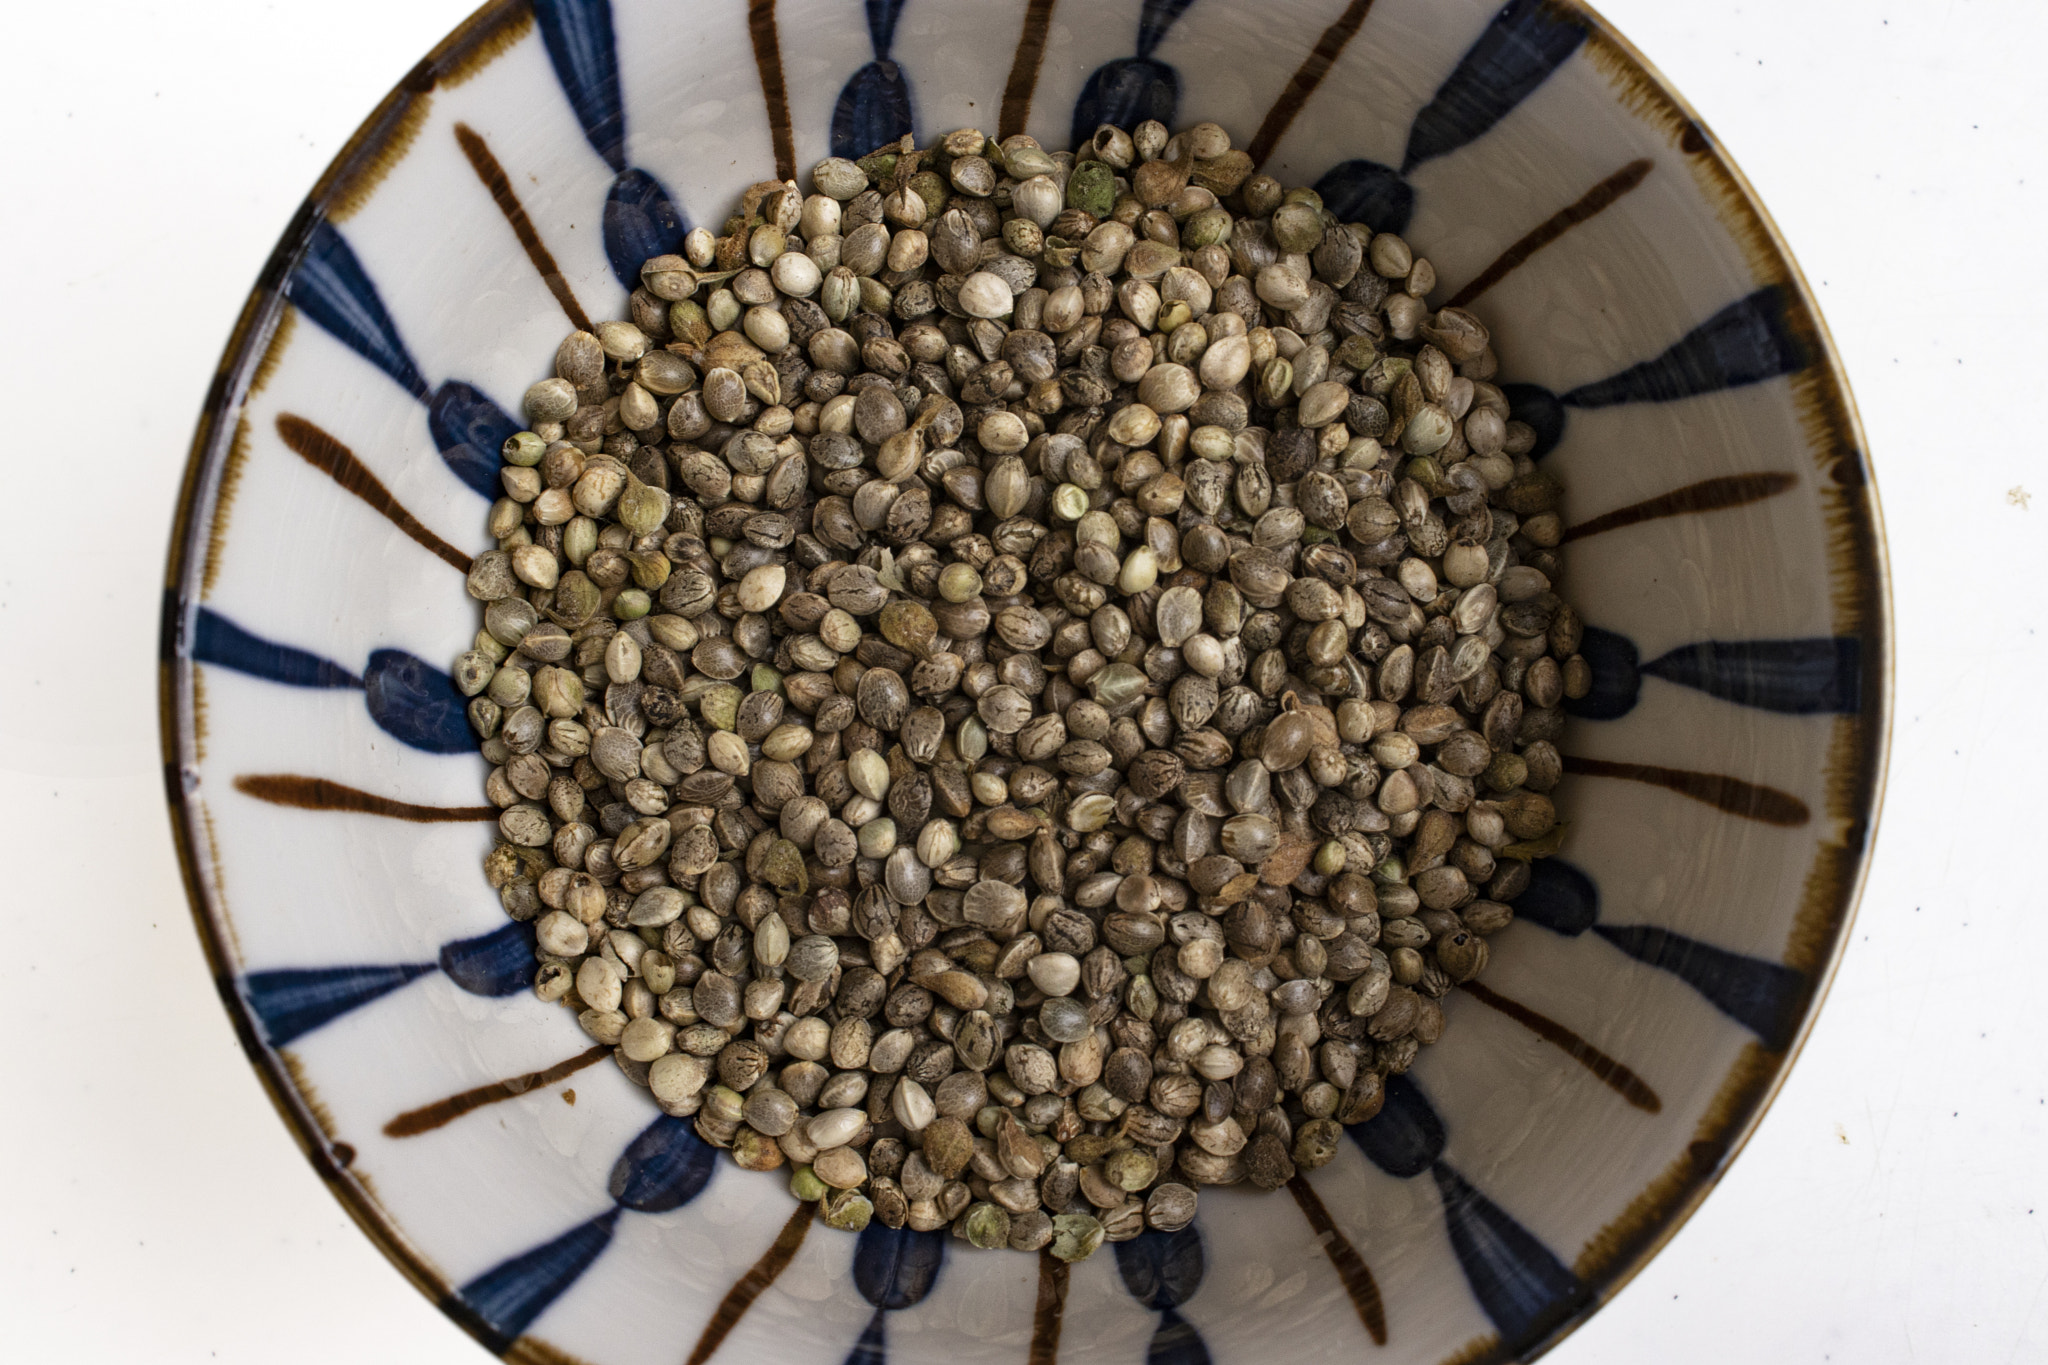 Directly above shot of hemp seeds in a bowl on white background